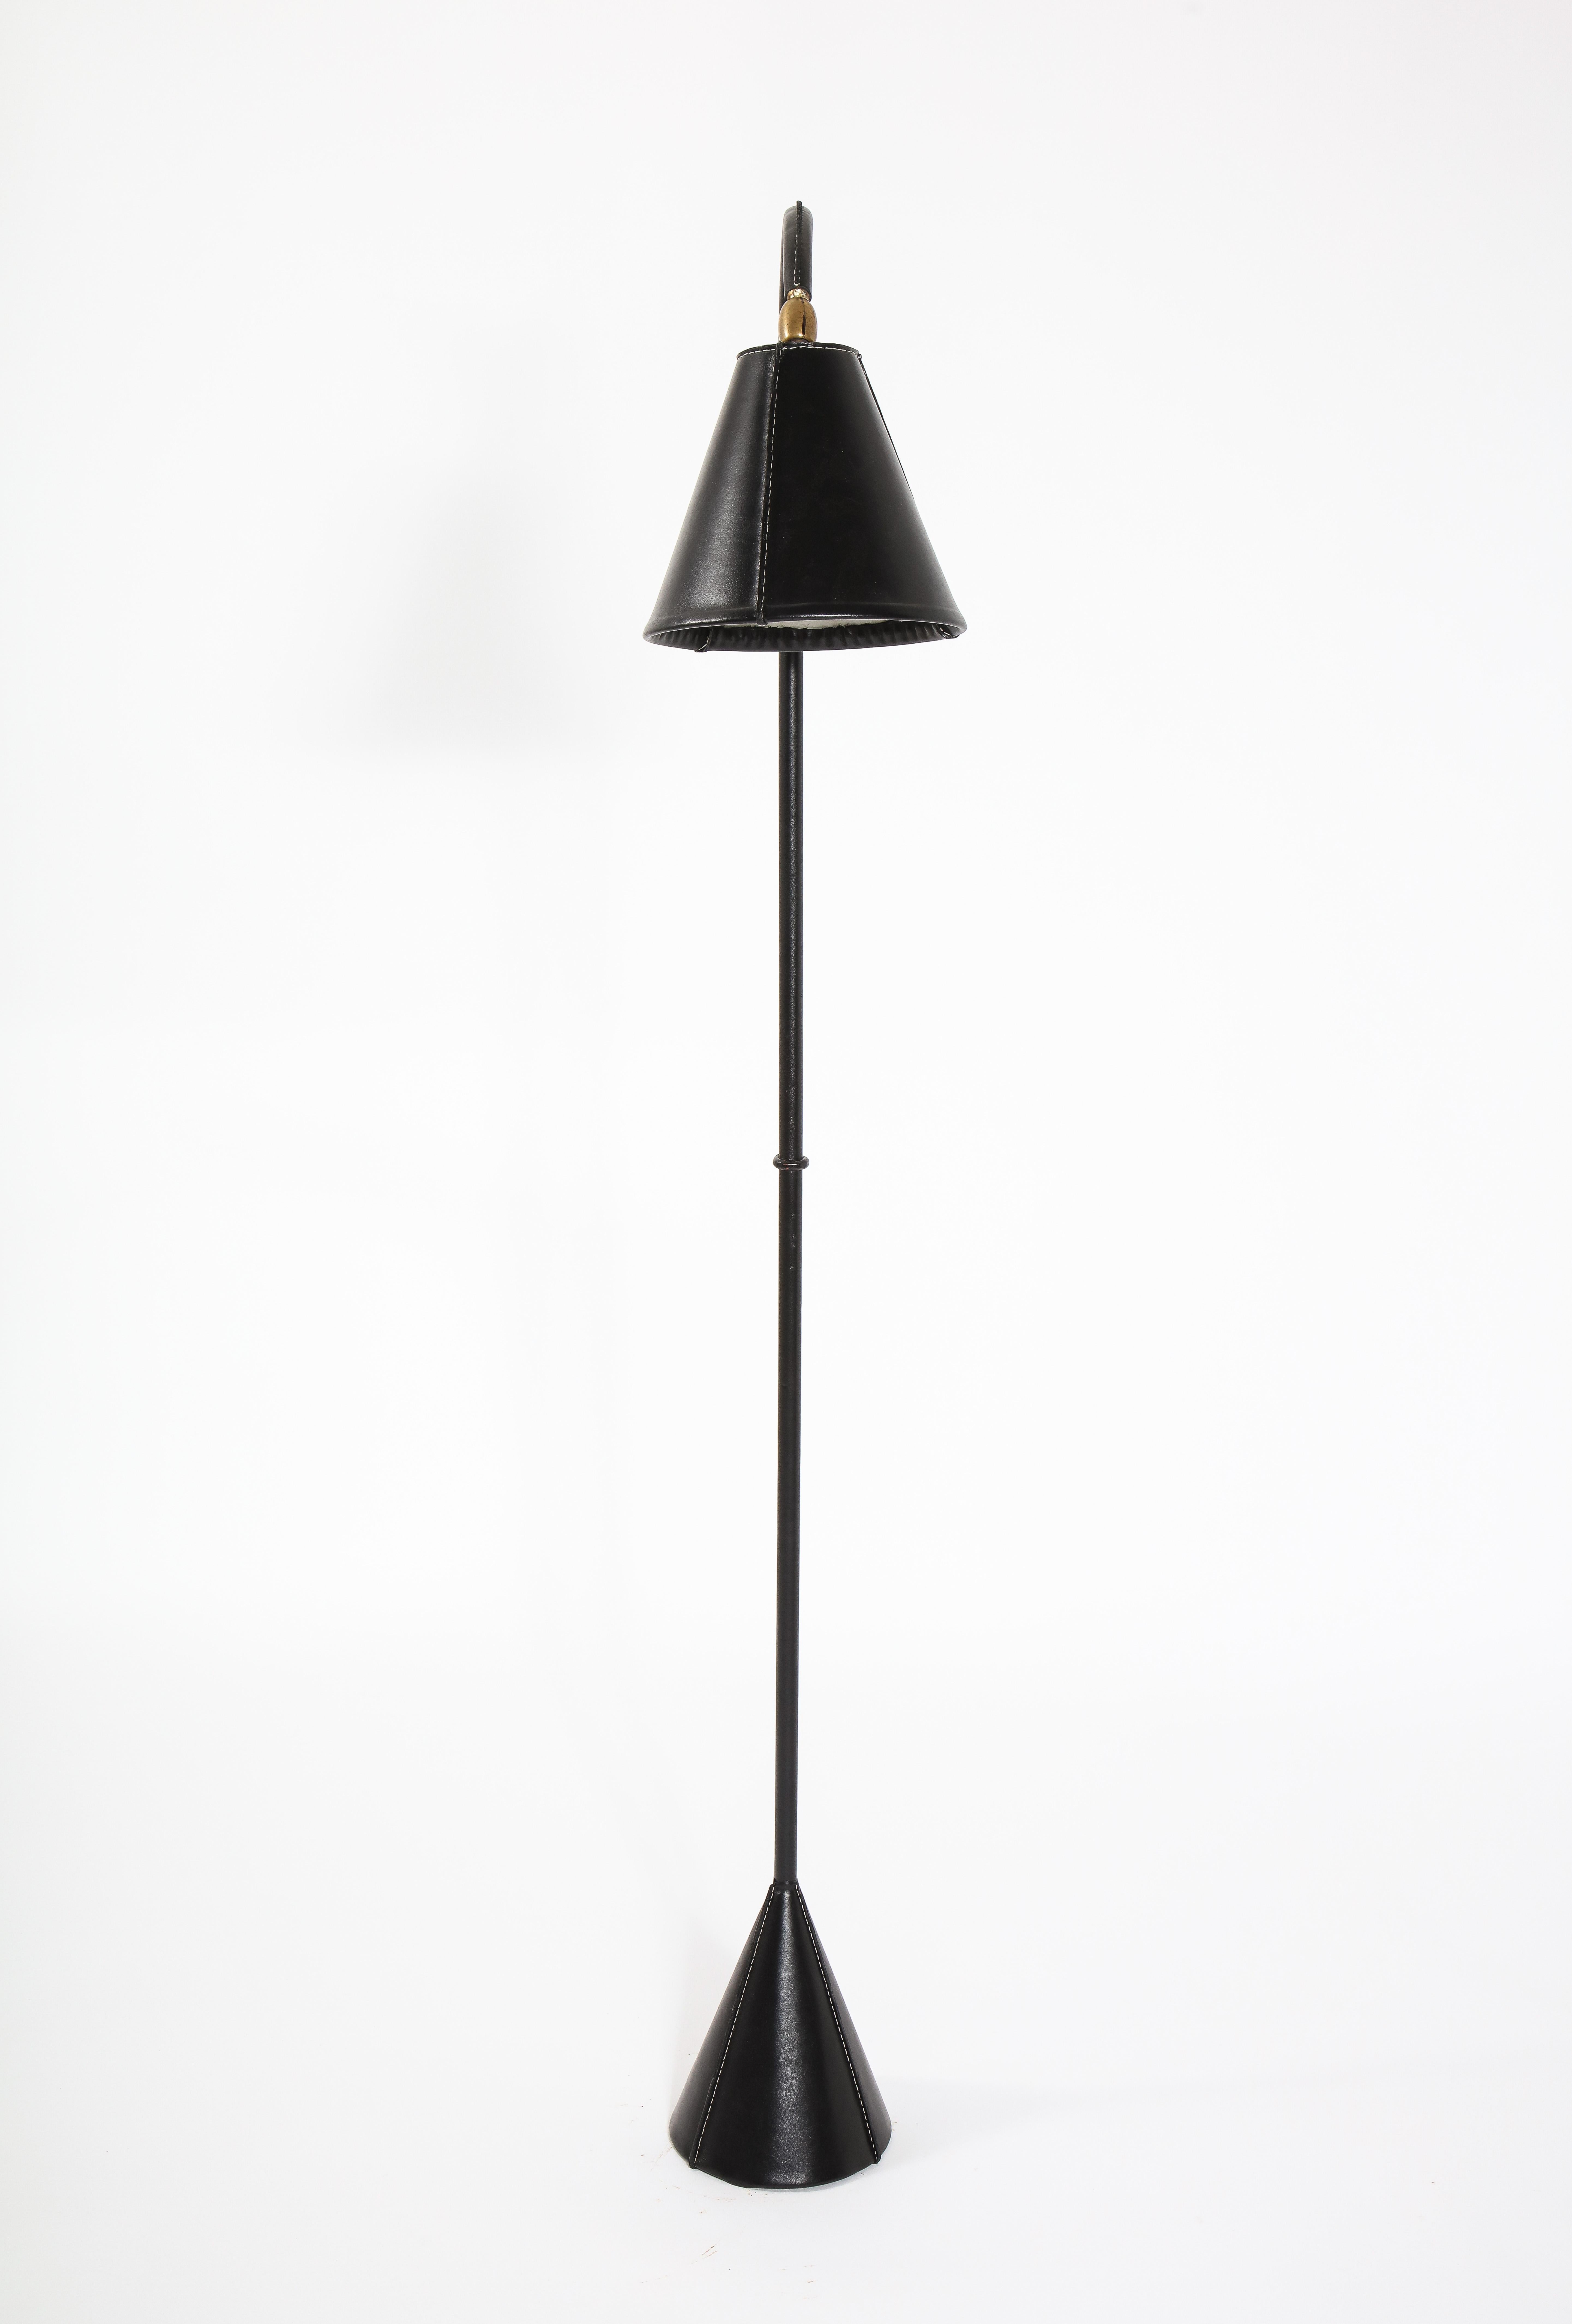 Jacques Adnet Dual Cone Floor Lamp. France, 1950s 1